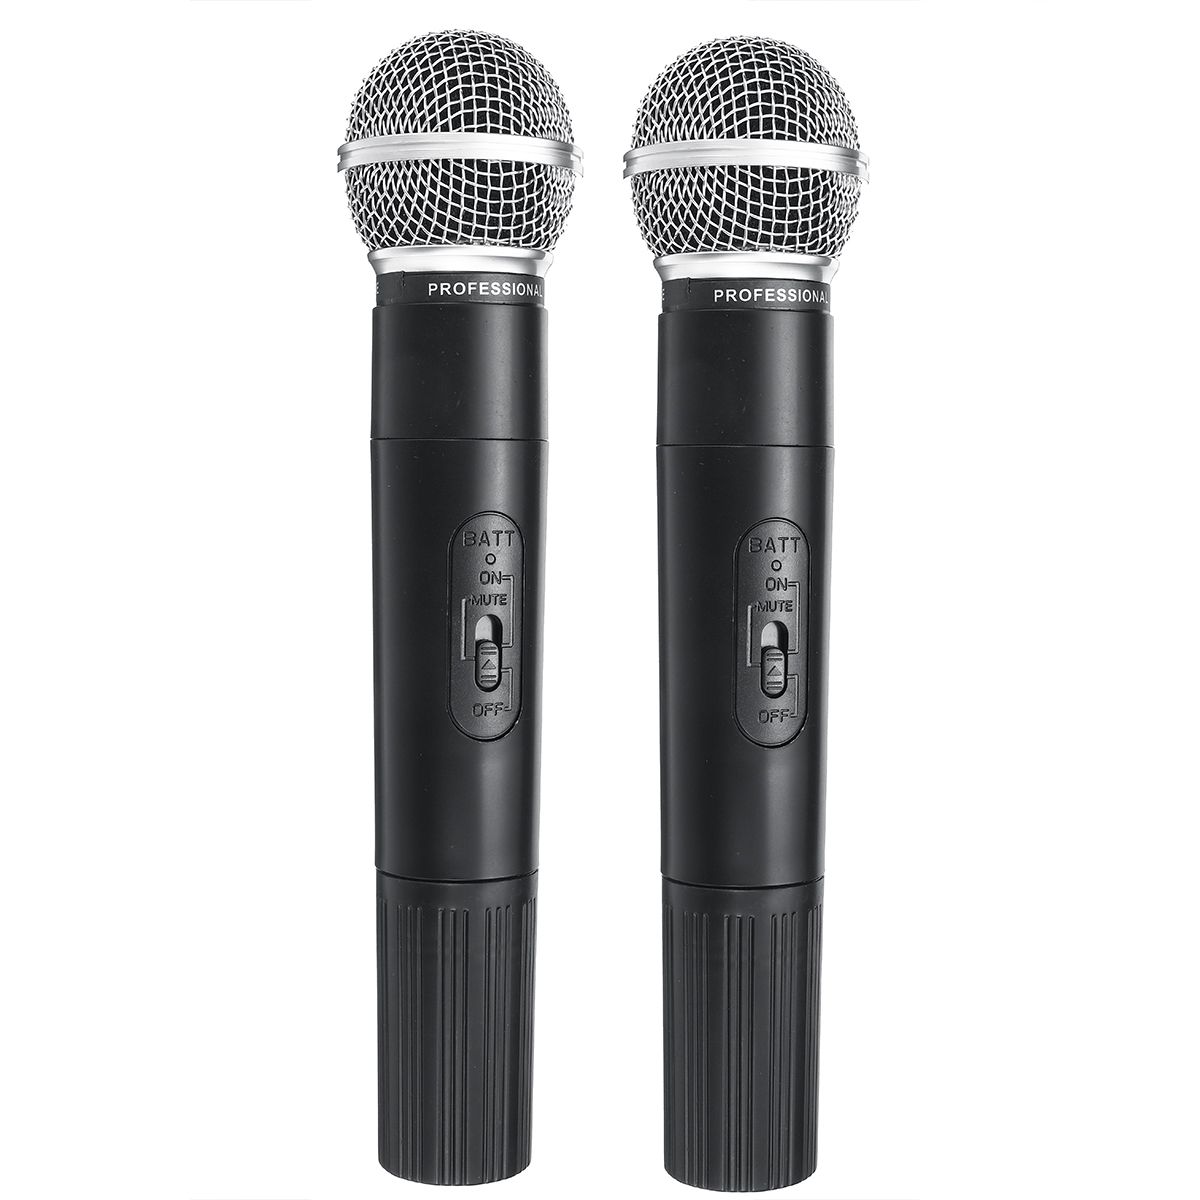 Professional-Dual-Handheld-VHF-Wireless-Microphone-System-Cordless-Karaoke-Microphone-Speaker-with-B-1594326